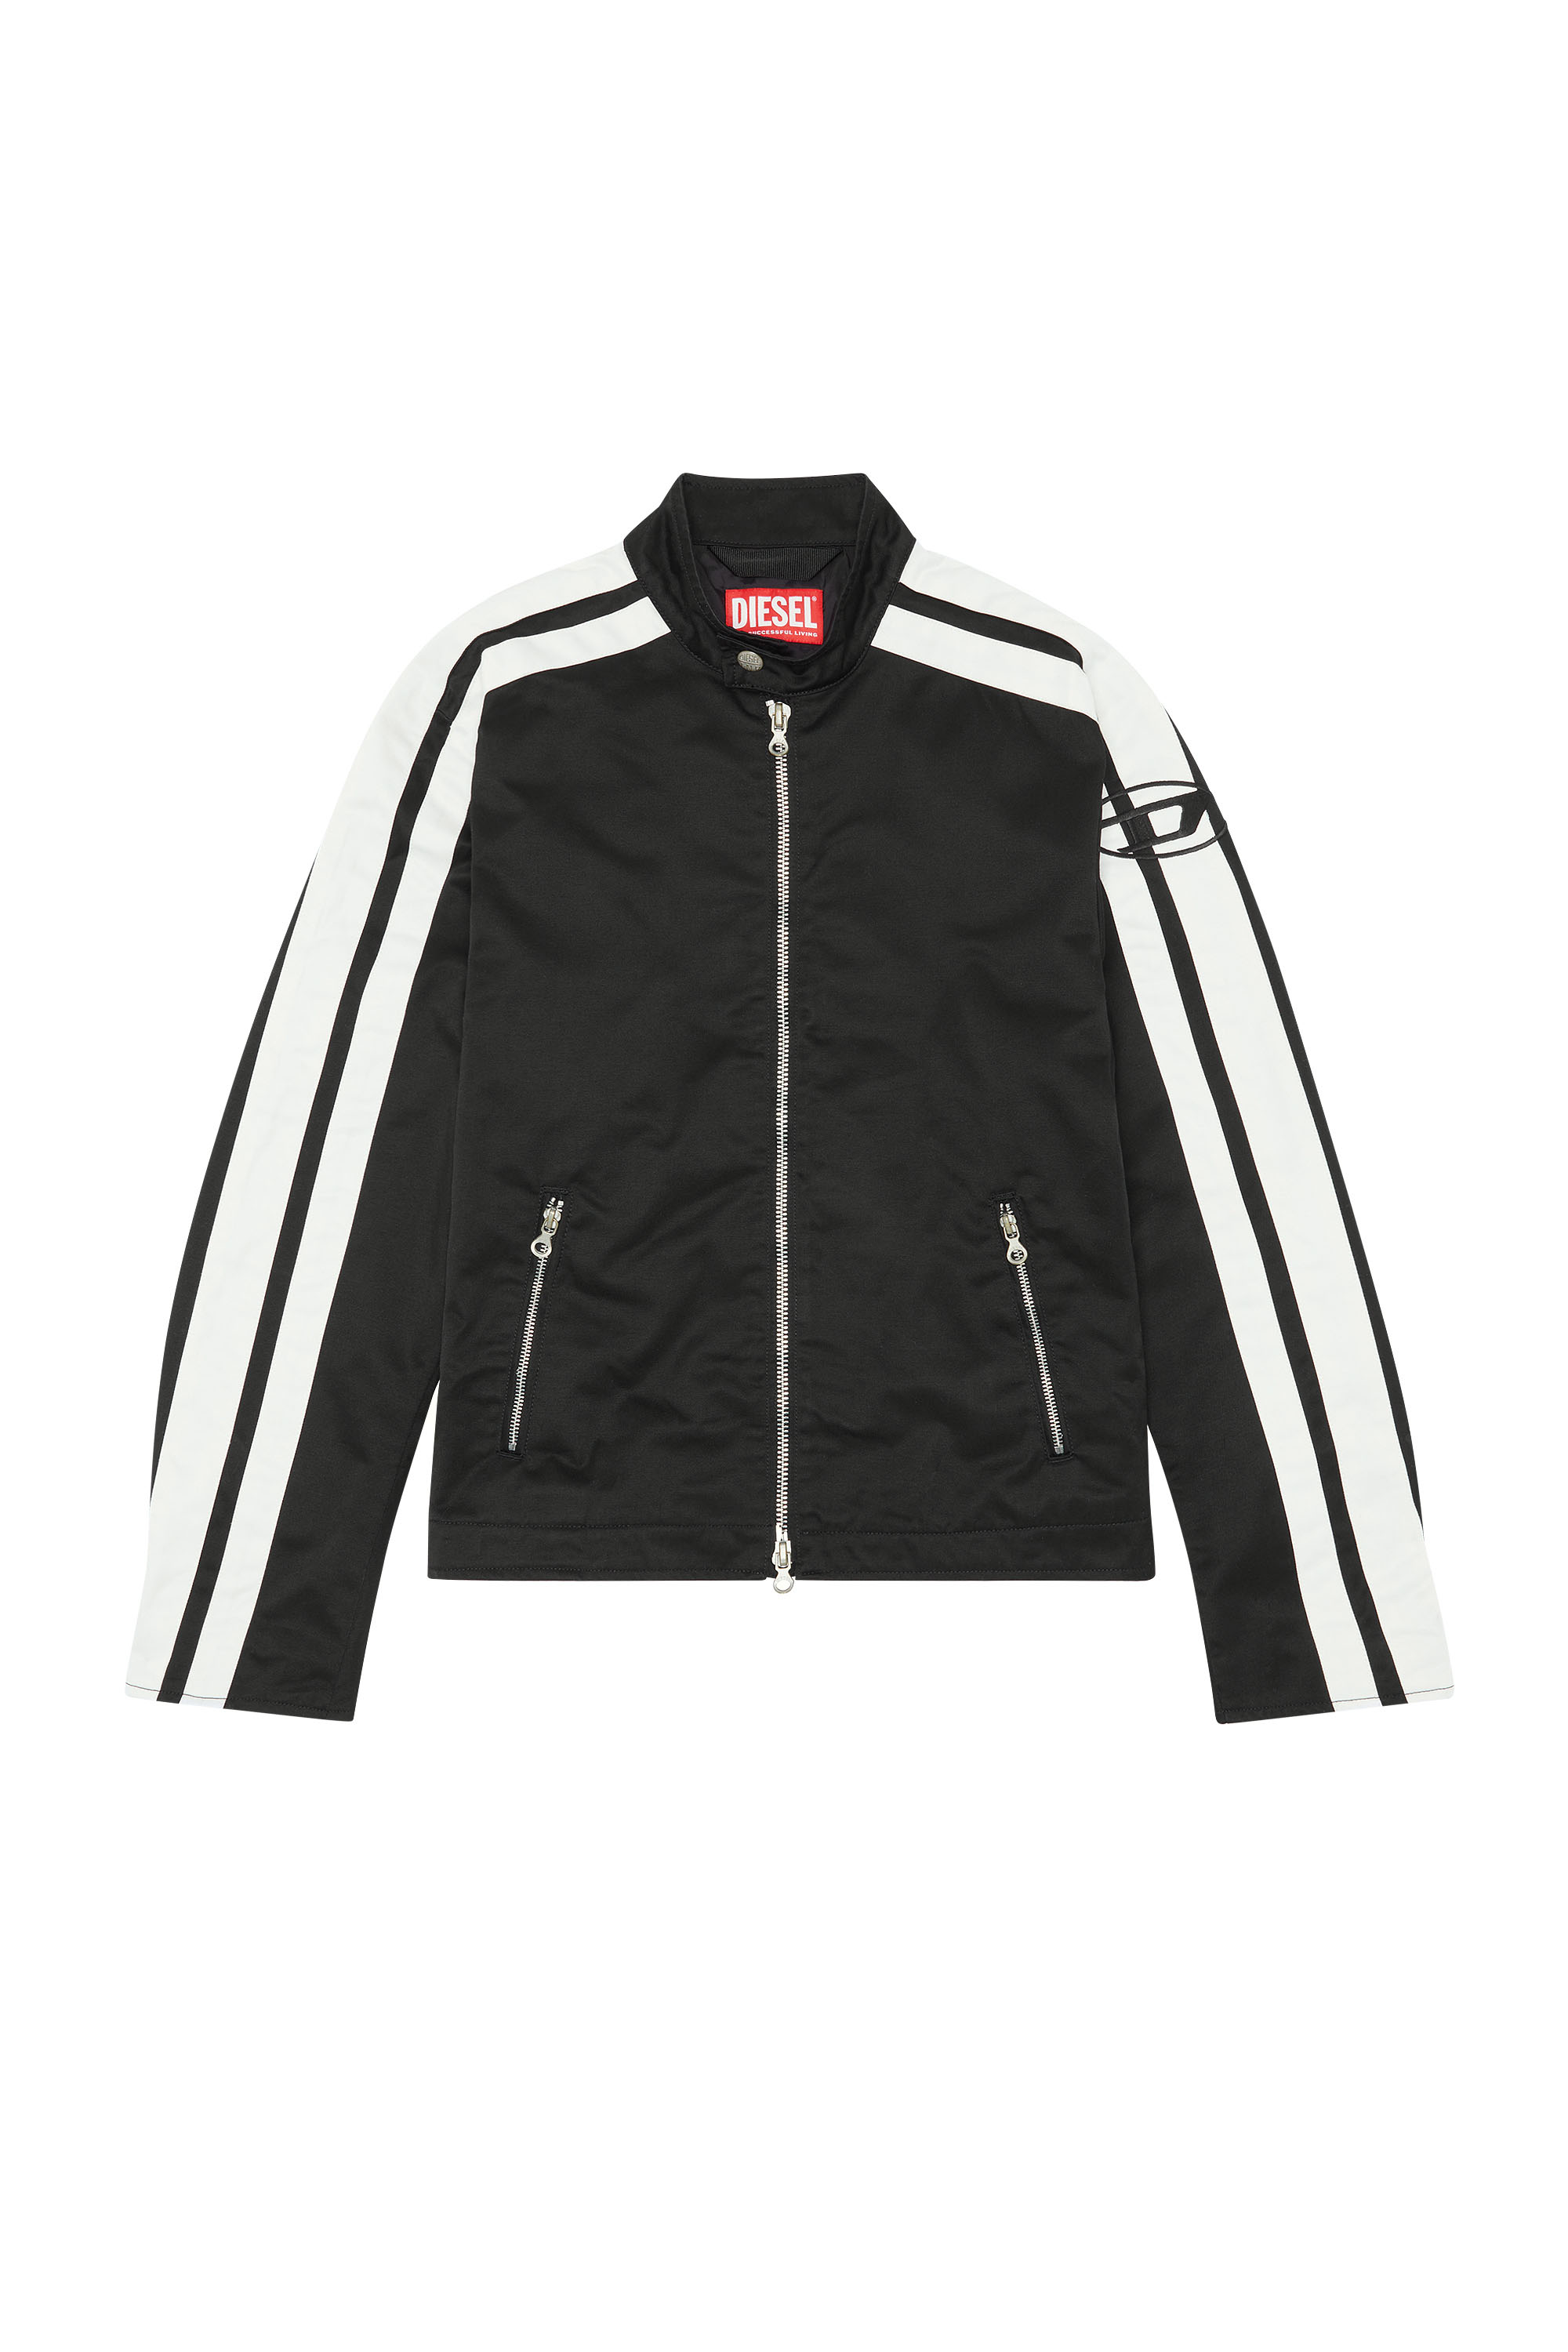 Diesel - J-BECK, Man Biker jacket in padded cotton with bands in Multicolor - Image 3